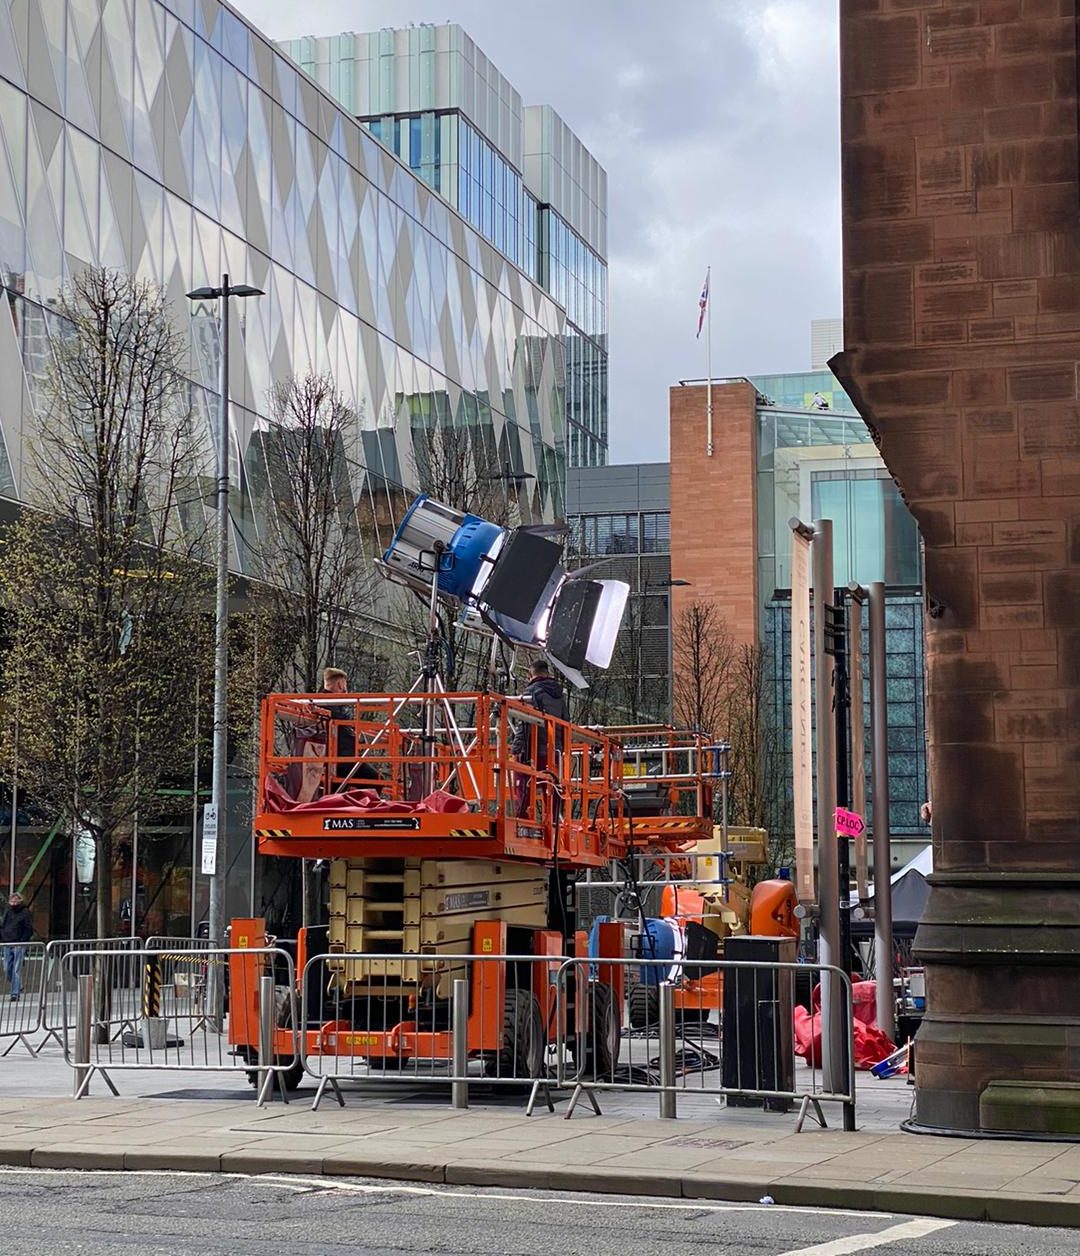 Netflix is currently filming a new series inside John Rylands Library on Deansgate, The Manc